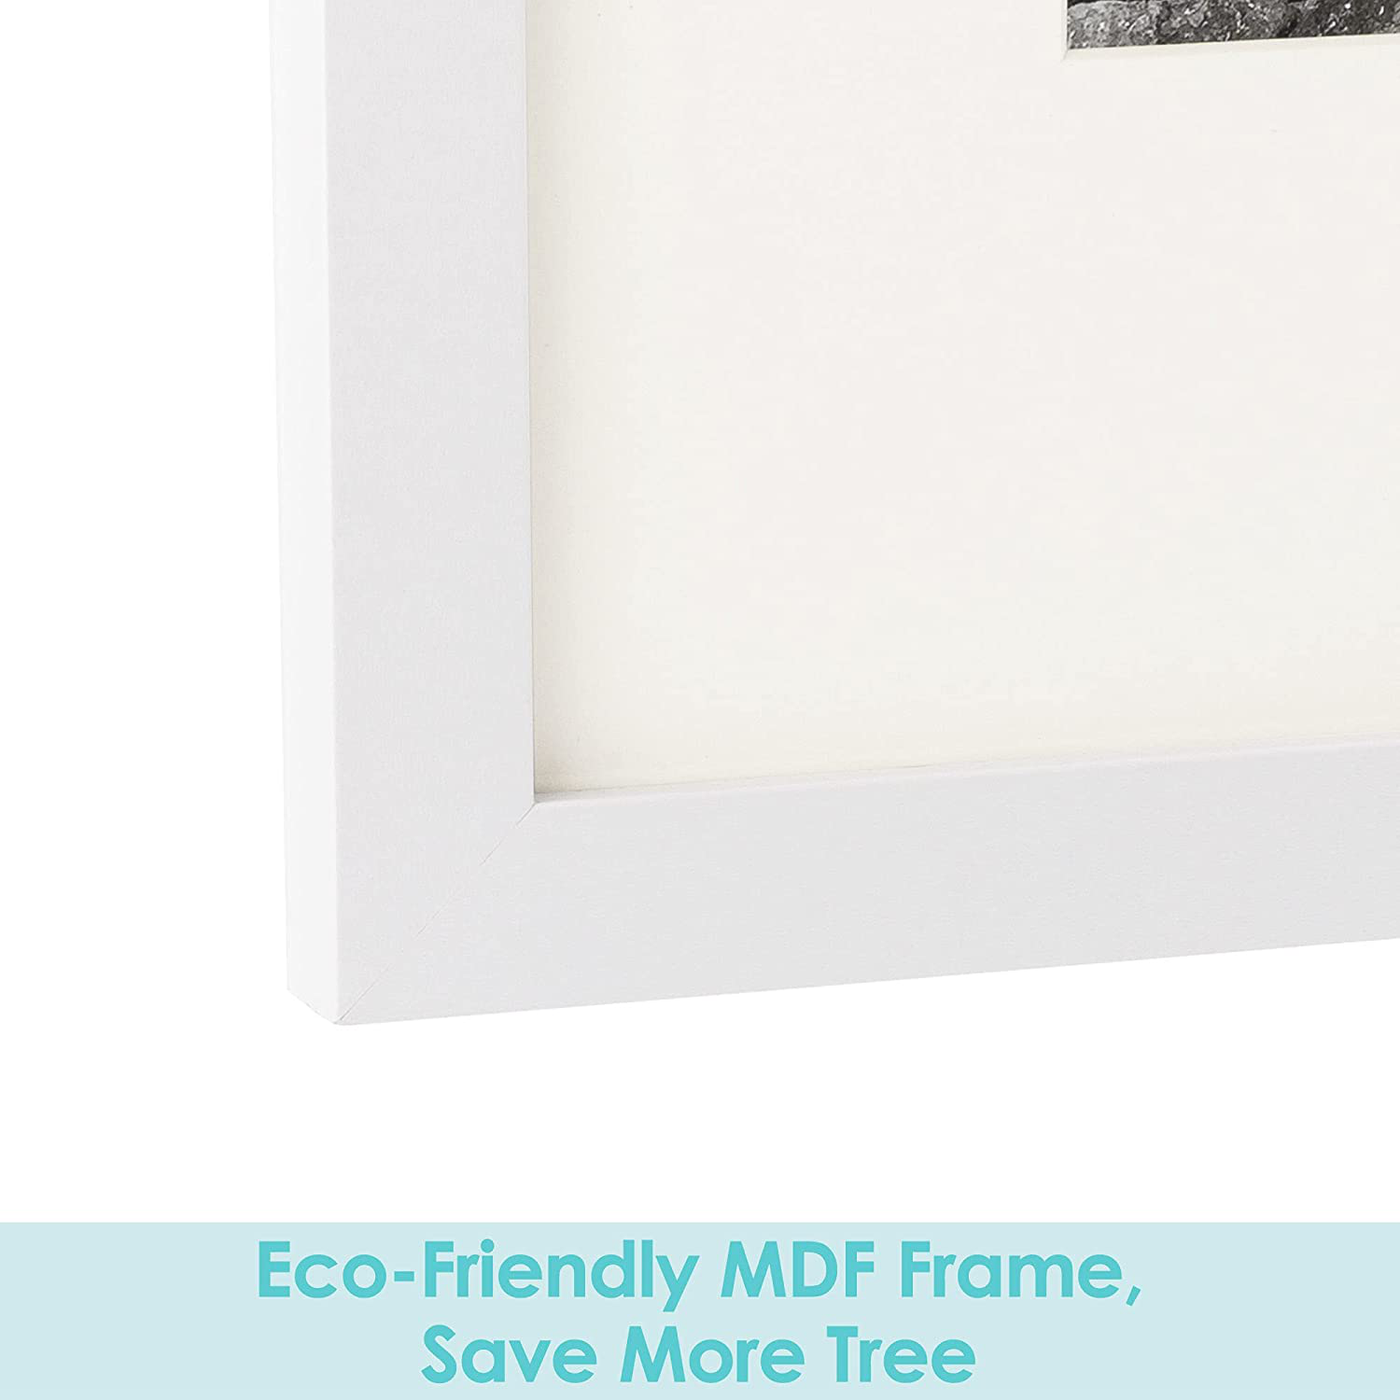 Frametory, 11x14 Picture Frame - Made to Display Pictures 8x10 with Mat or 11x14 Without Mat - Wide Molding - Pre-Installed Wall Mounting Hardware (White, 1 Pack)